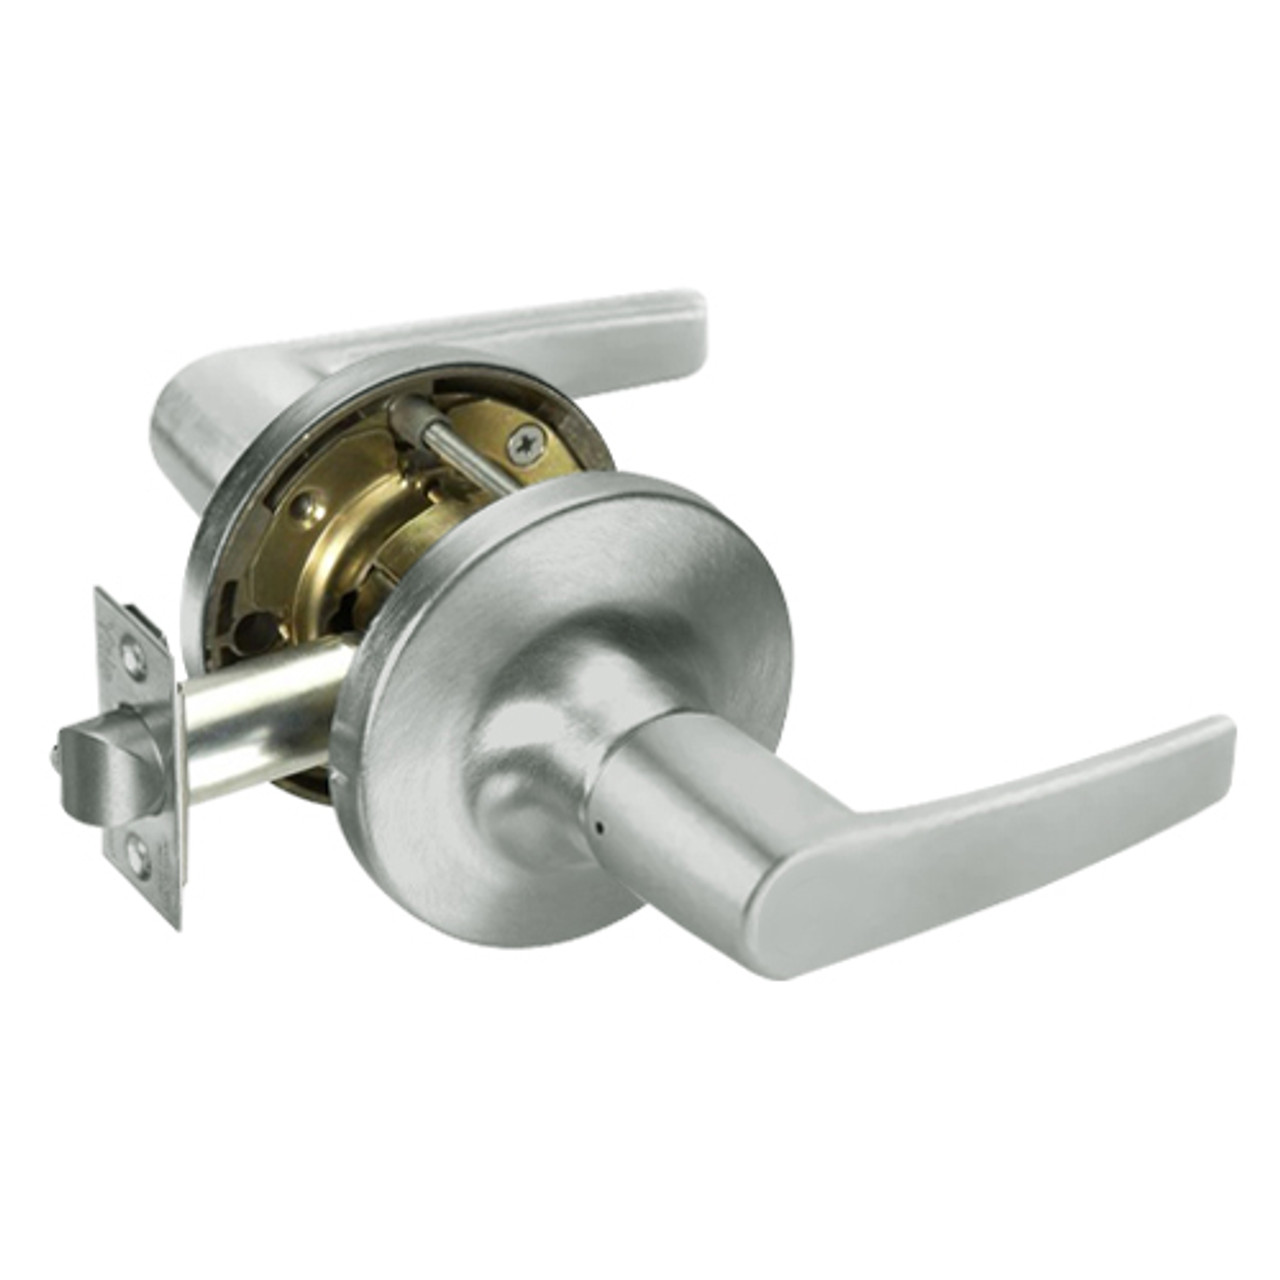 MO5409LN-619 Yale 5400LN Series Non-Keyed Exit Latch Cylindrical Locks with Monroe Lever in Satin Nickel